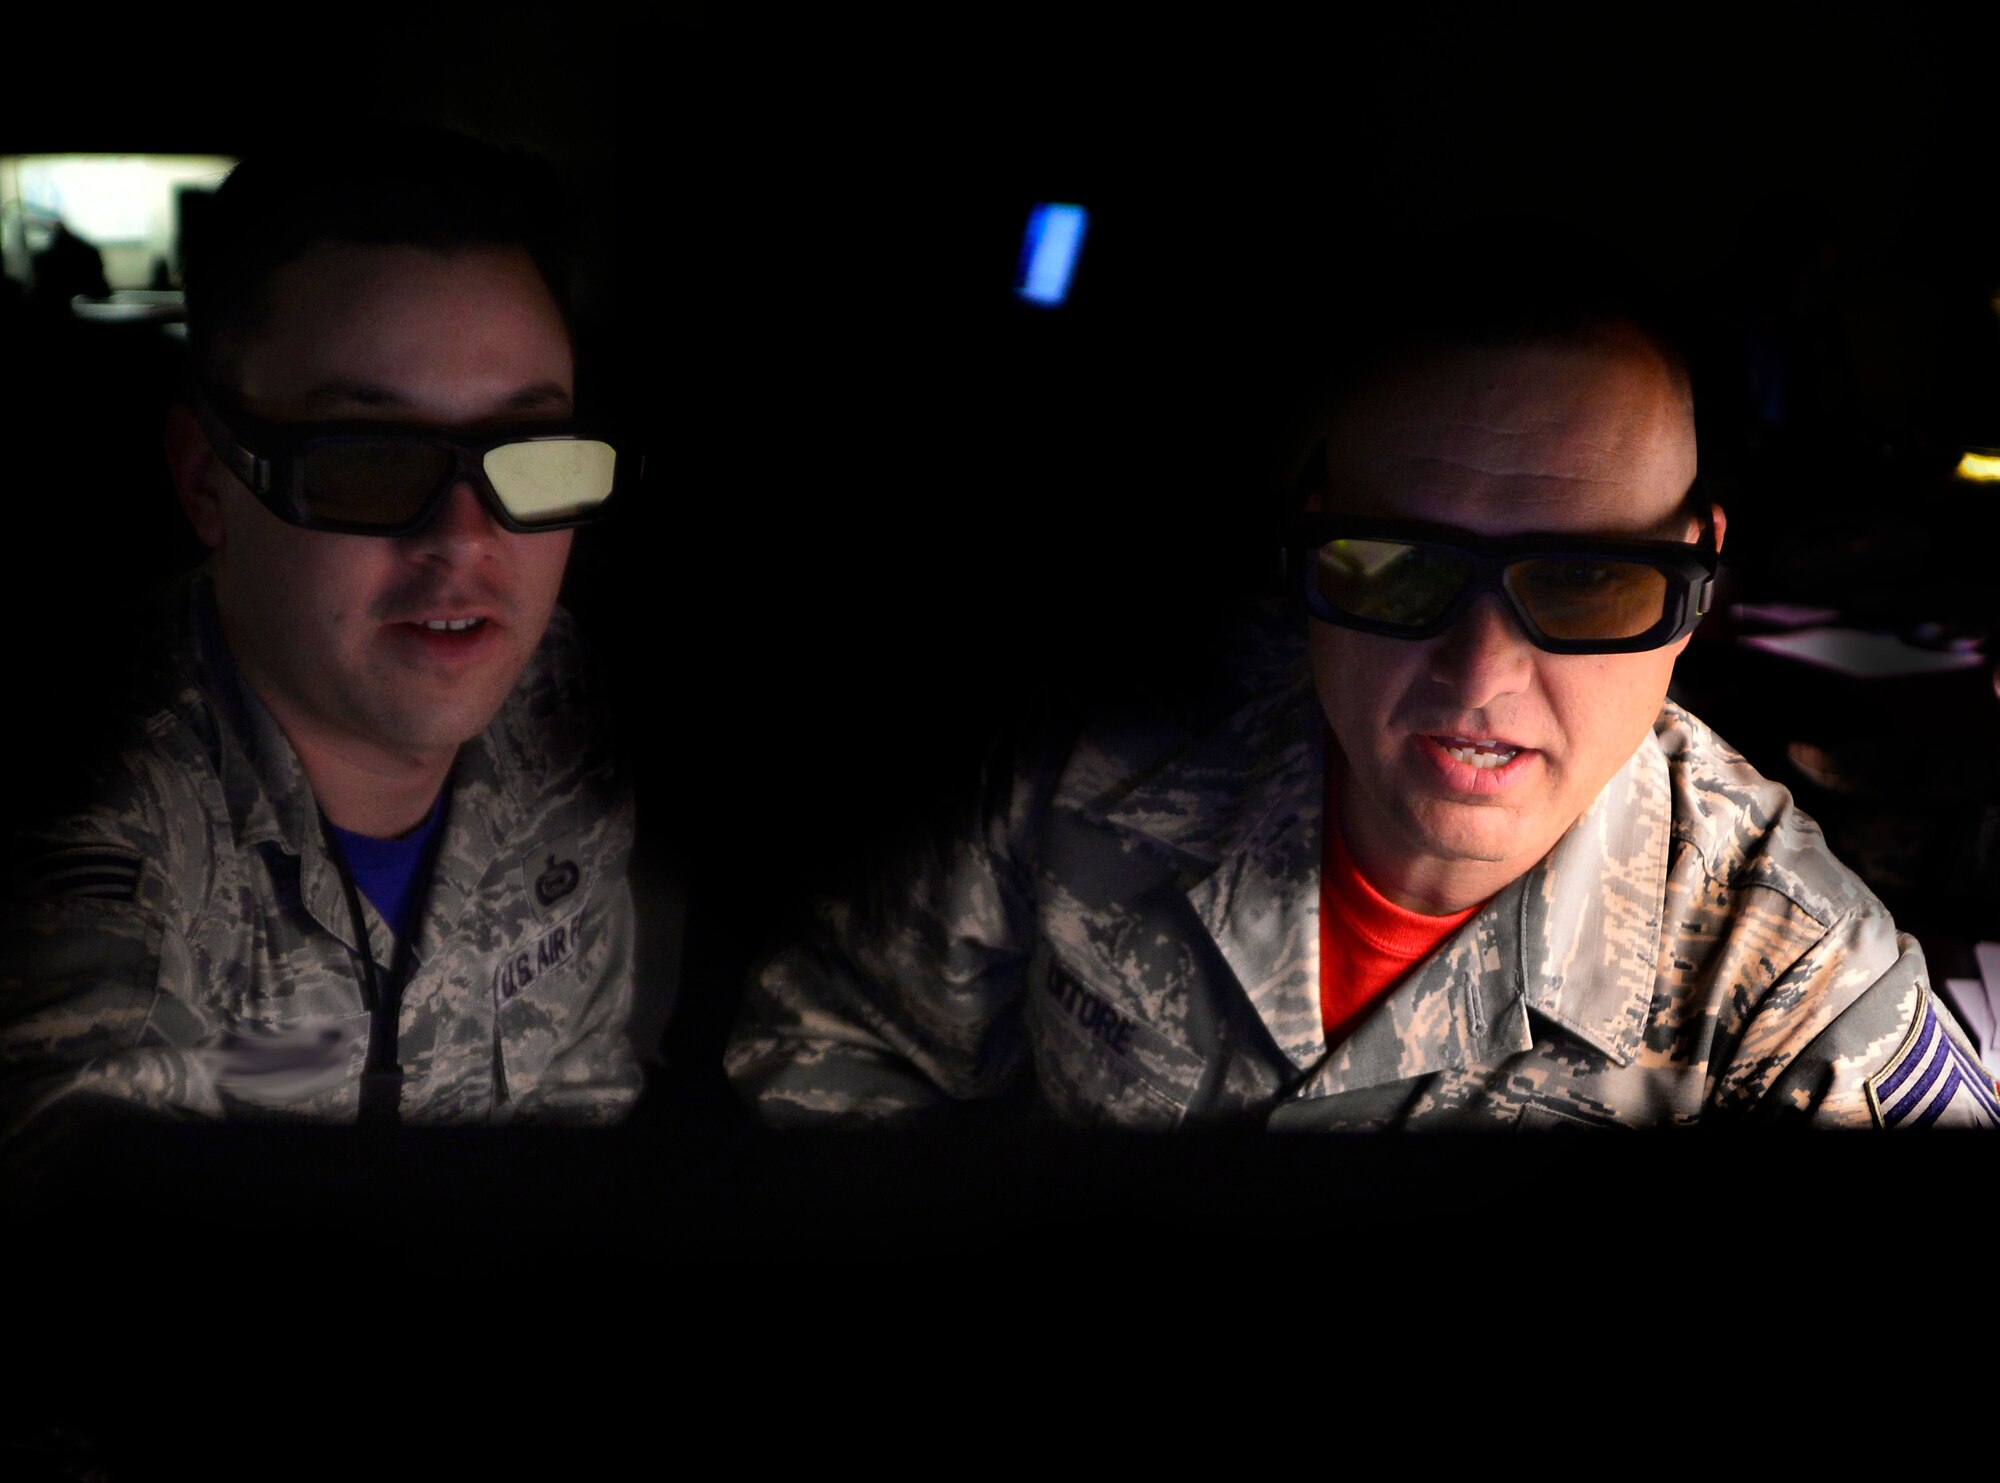 Staff Sgt. Andrew, 22nd Reconnaissance Squadron geospatial intelligence target coordinator, explains how targeteers use 3-D glasses to Chief Master Sgt. Michael Ditore, 432nd Wing/432nd Air Expeditionary Wing command chief April 1, 2016 at Creech Air Force Base, Nevada. Targeteers use the 3-D glasses to better identify which weapons should be used on a specific target. (U.S. Air Force photo by Senior Airman Christian Clausen/Released)